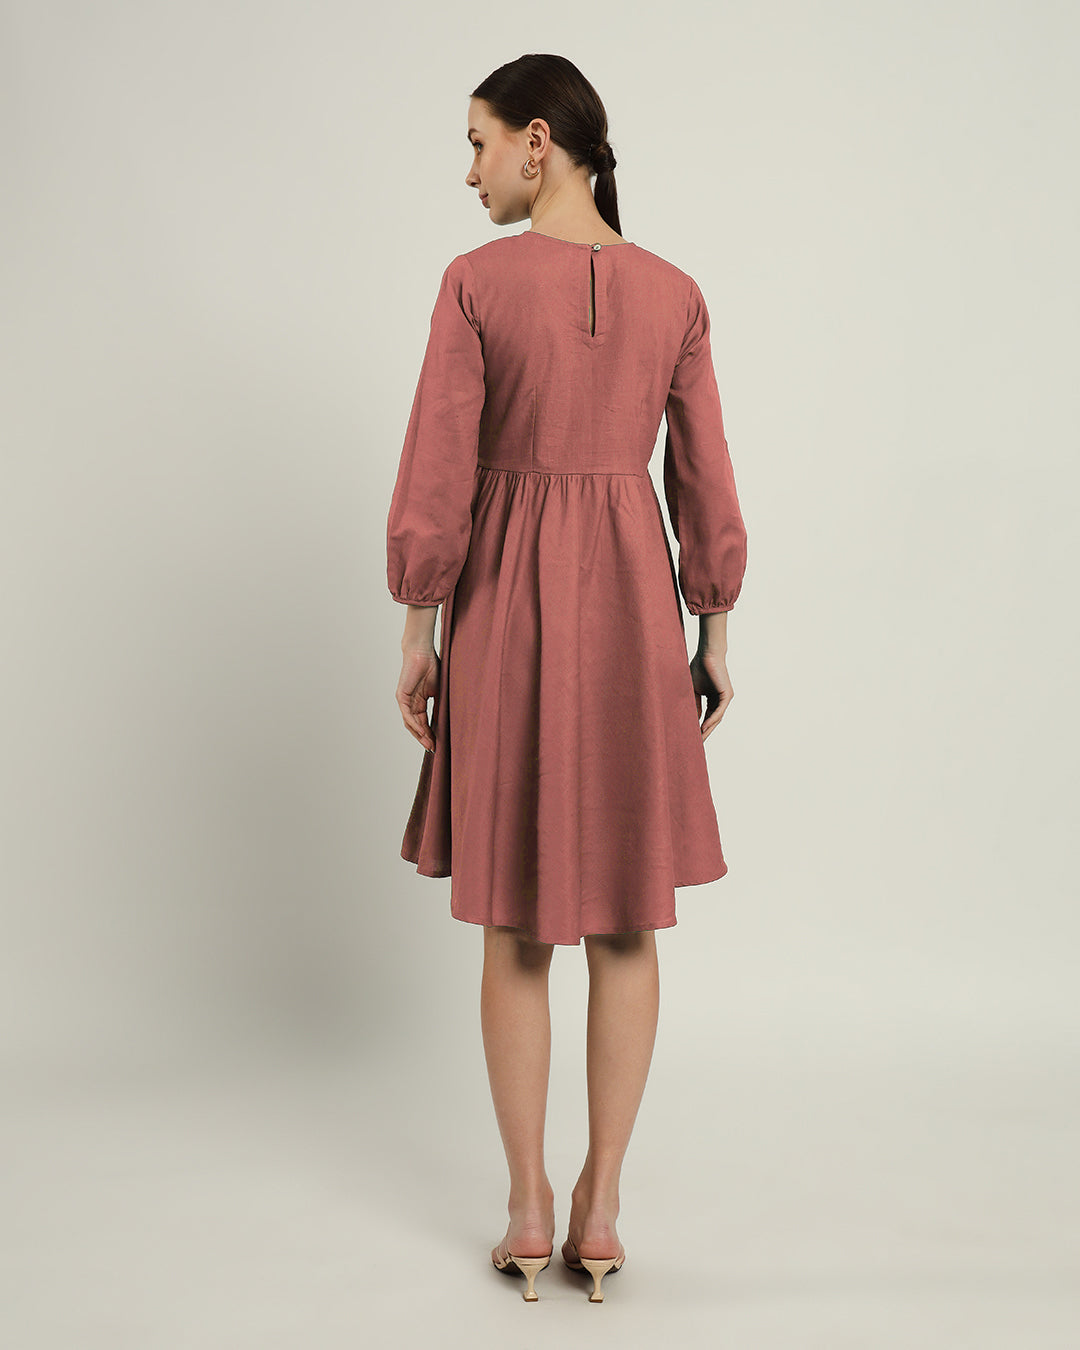 The Exeter Ivory Pink Cotton Dress